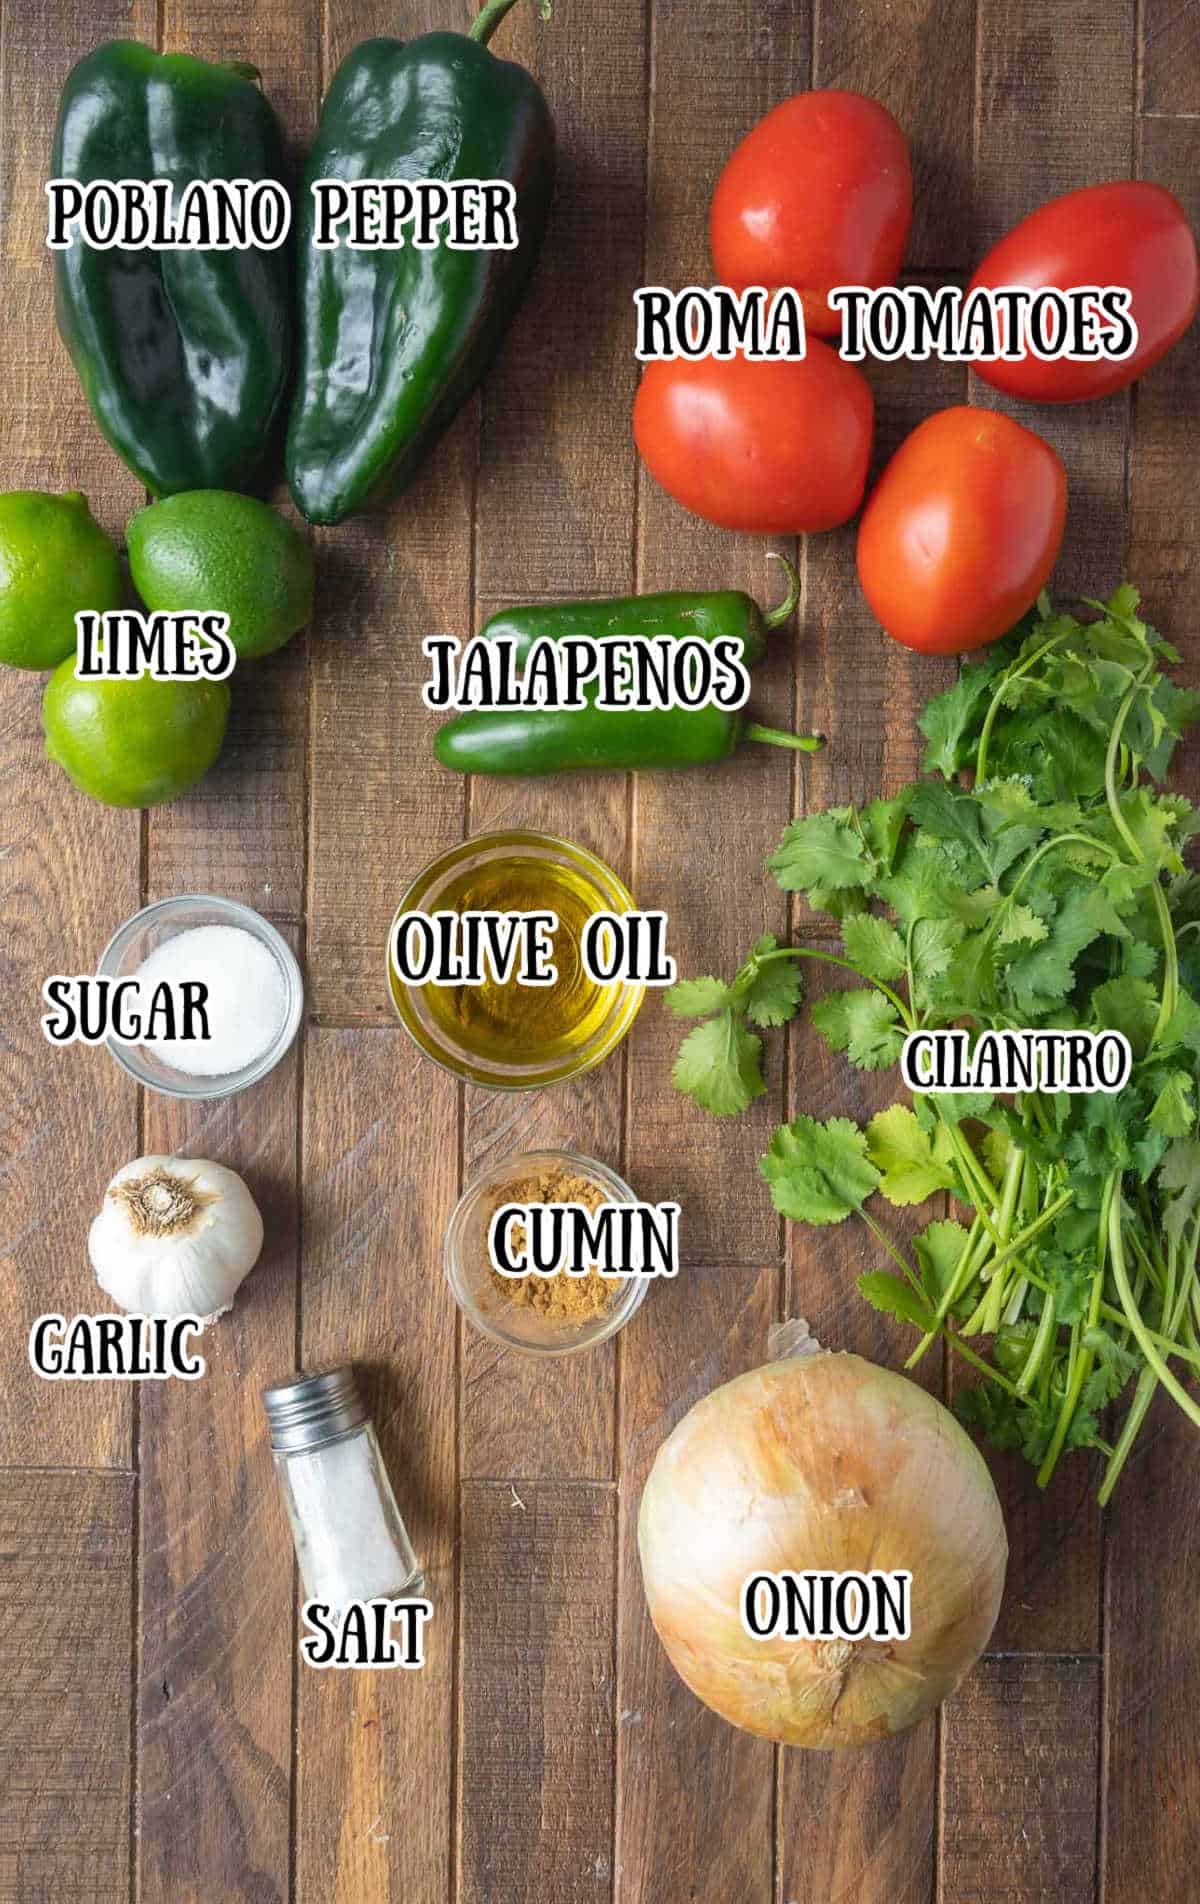 All the ingredients needed for this salsa.